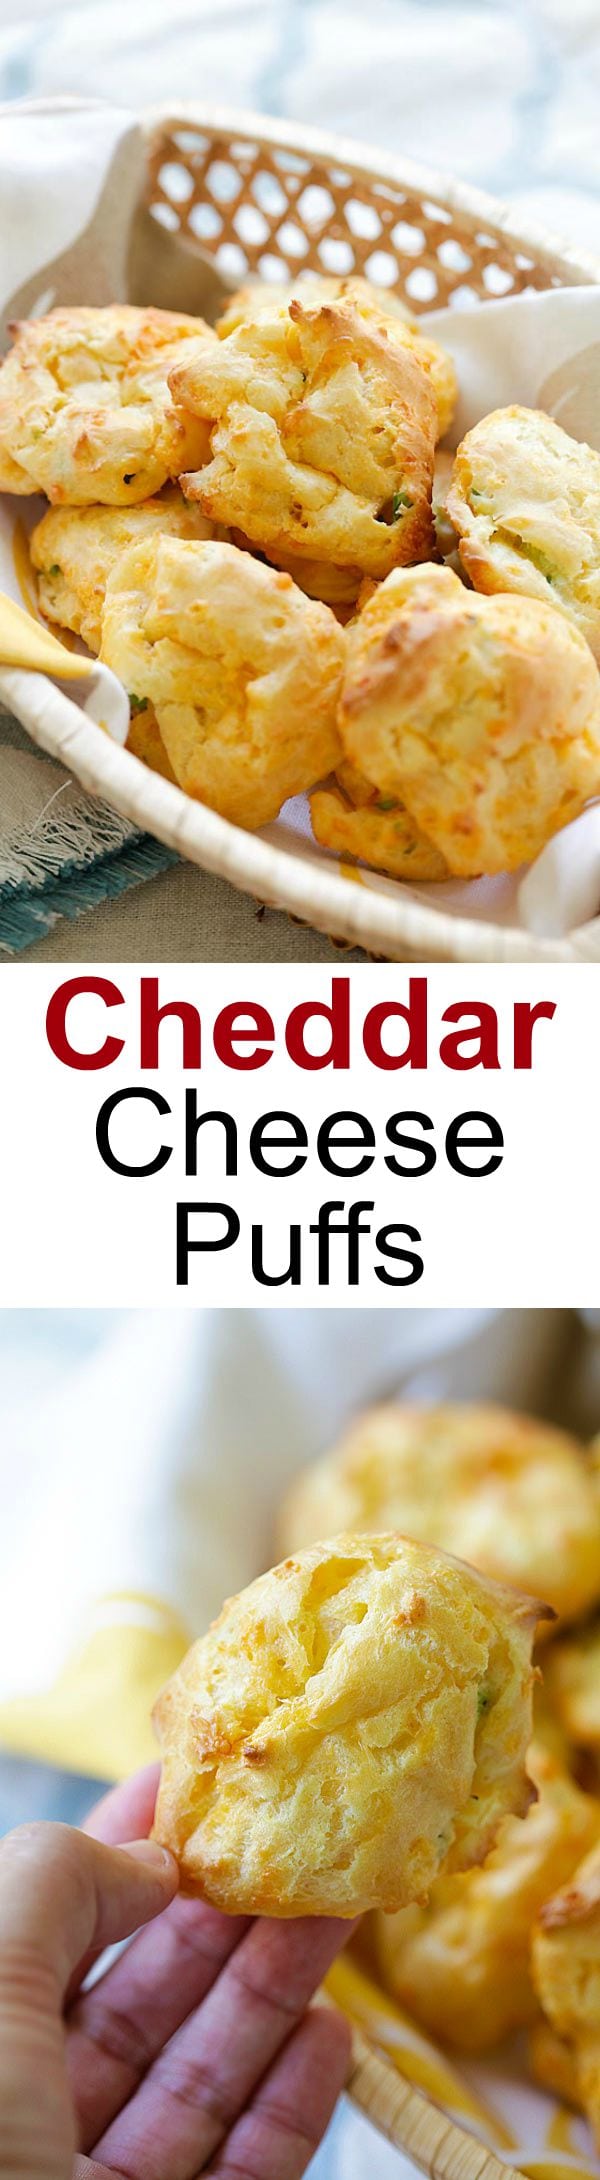 Cheddar Cheese Puffs - French puff pastry loaded with cheddar cheese and chopped scallions, so buttery, cheesy, yummy and easy to make! | rasamalaysia.com